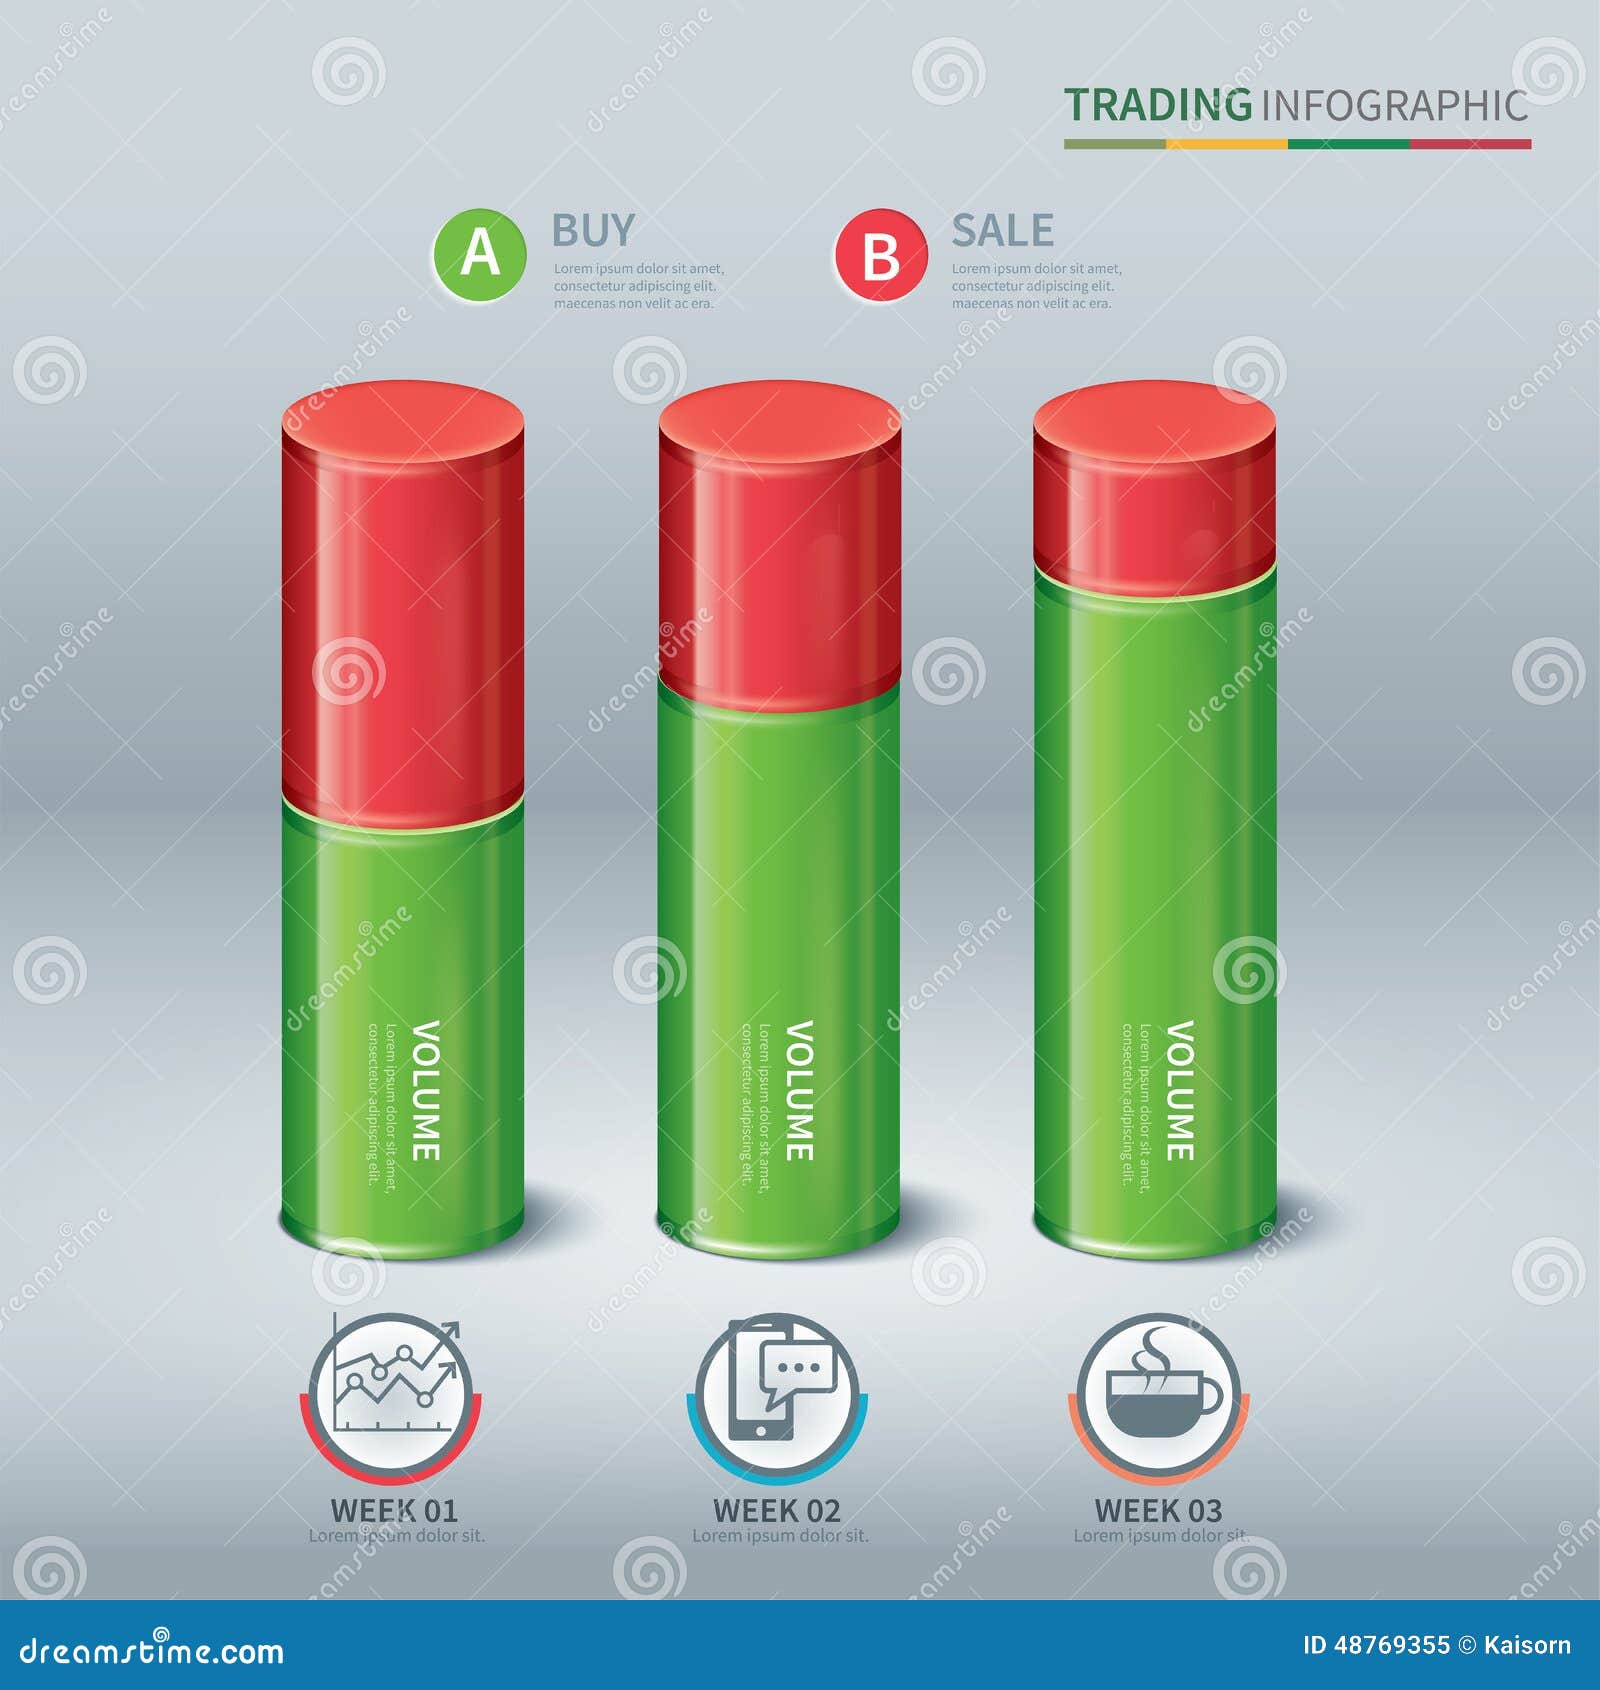 trading cylindrical bars infographic